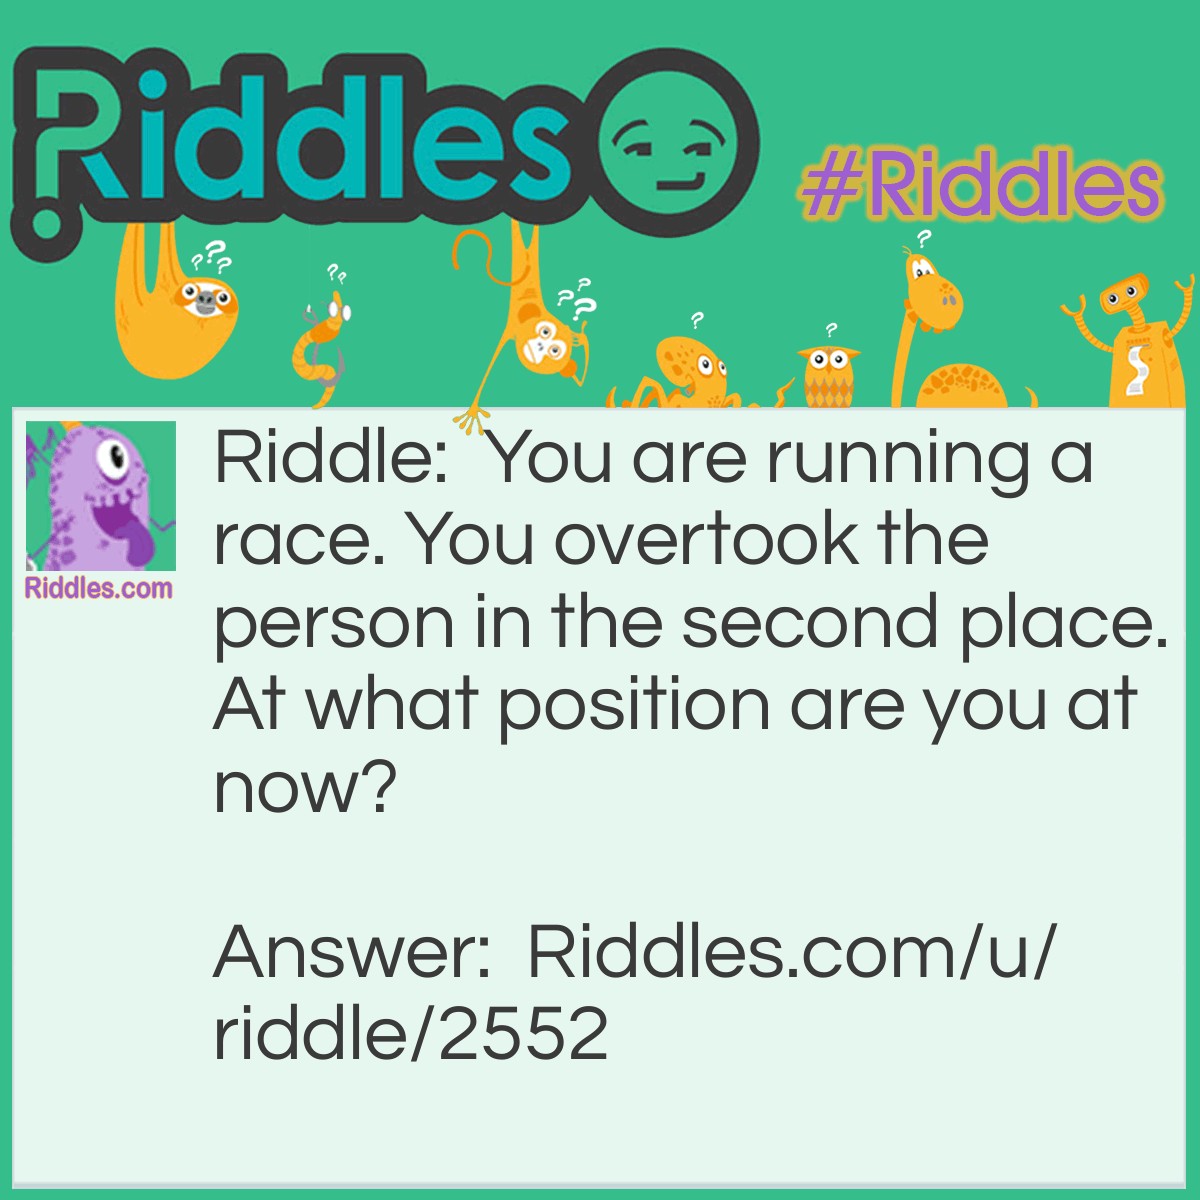 Riddle: You are running a race. You overtook the person in the second place. At what position are you at now? Answer: Second.You still have to overtake one more person (the person at the first place) to win the race!